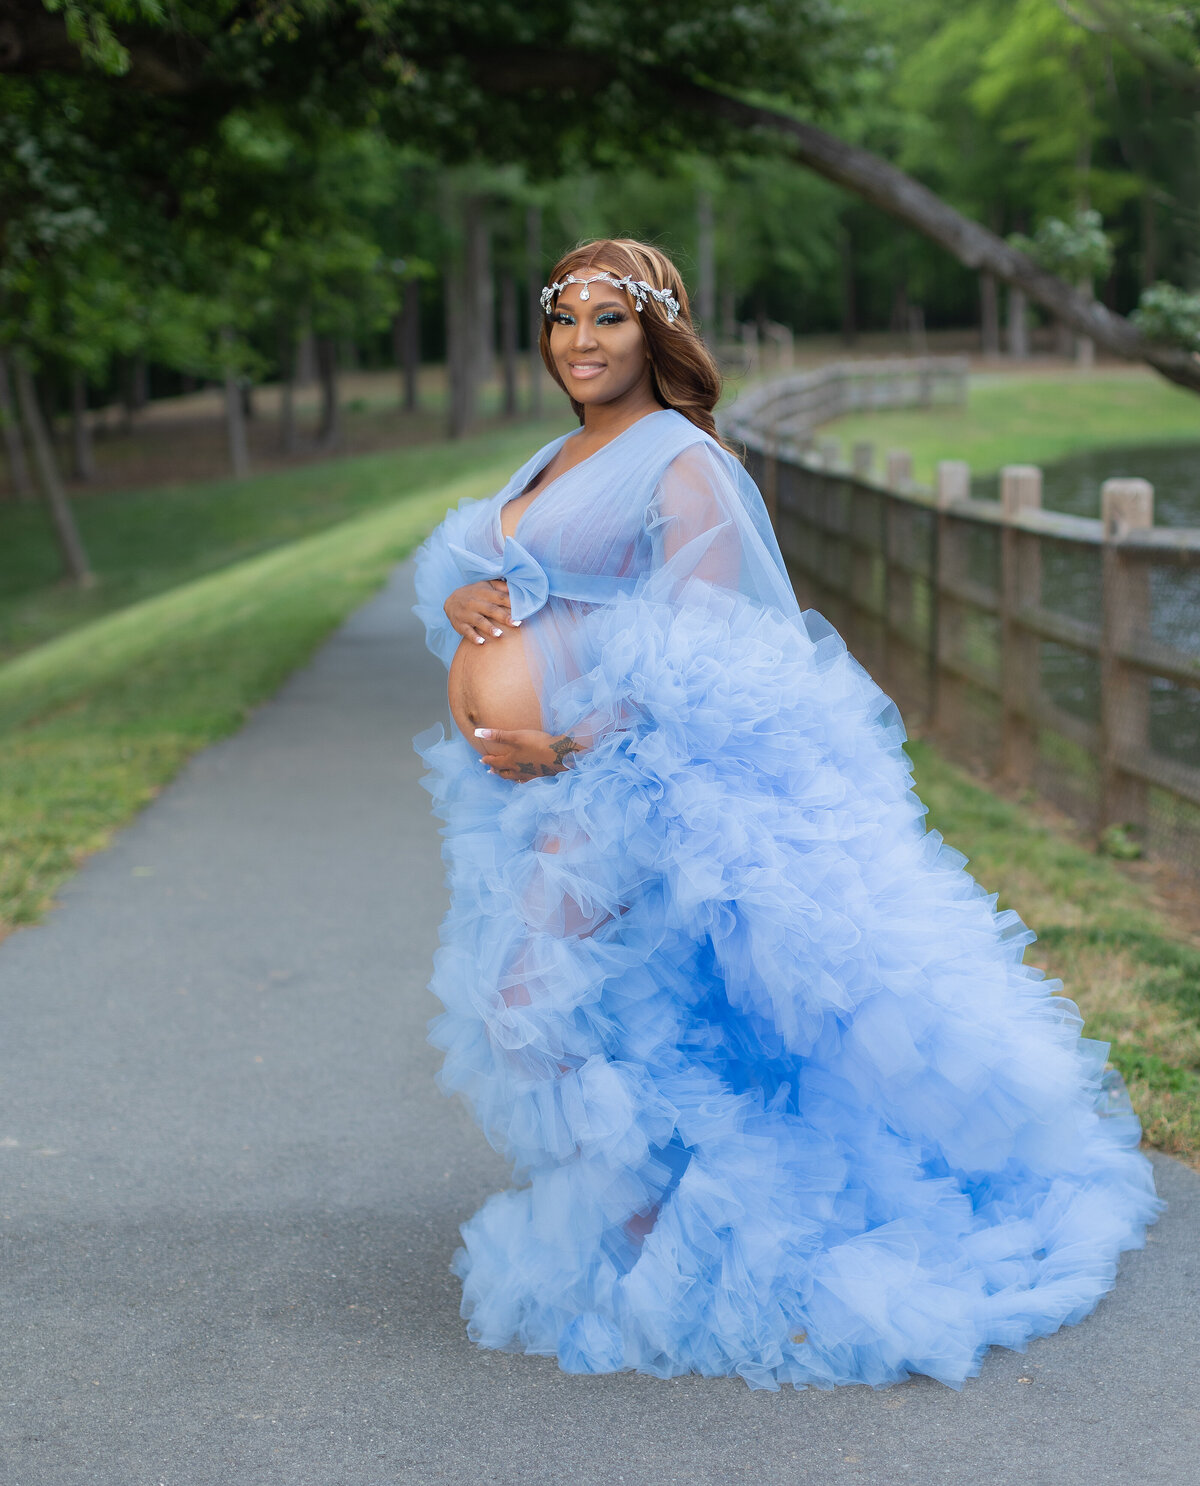 MATERNITY SESSION USING FABRIC WRAPS TO DRESS PREGNANT LADY